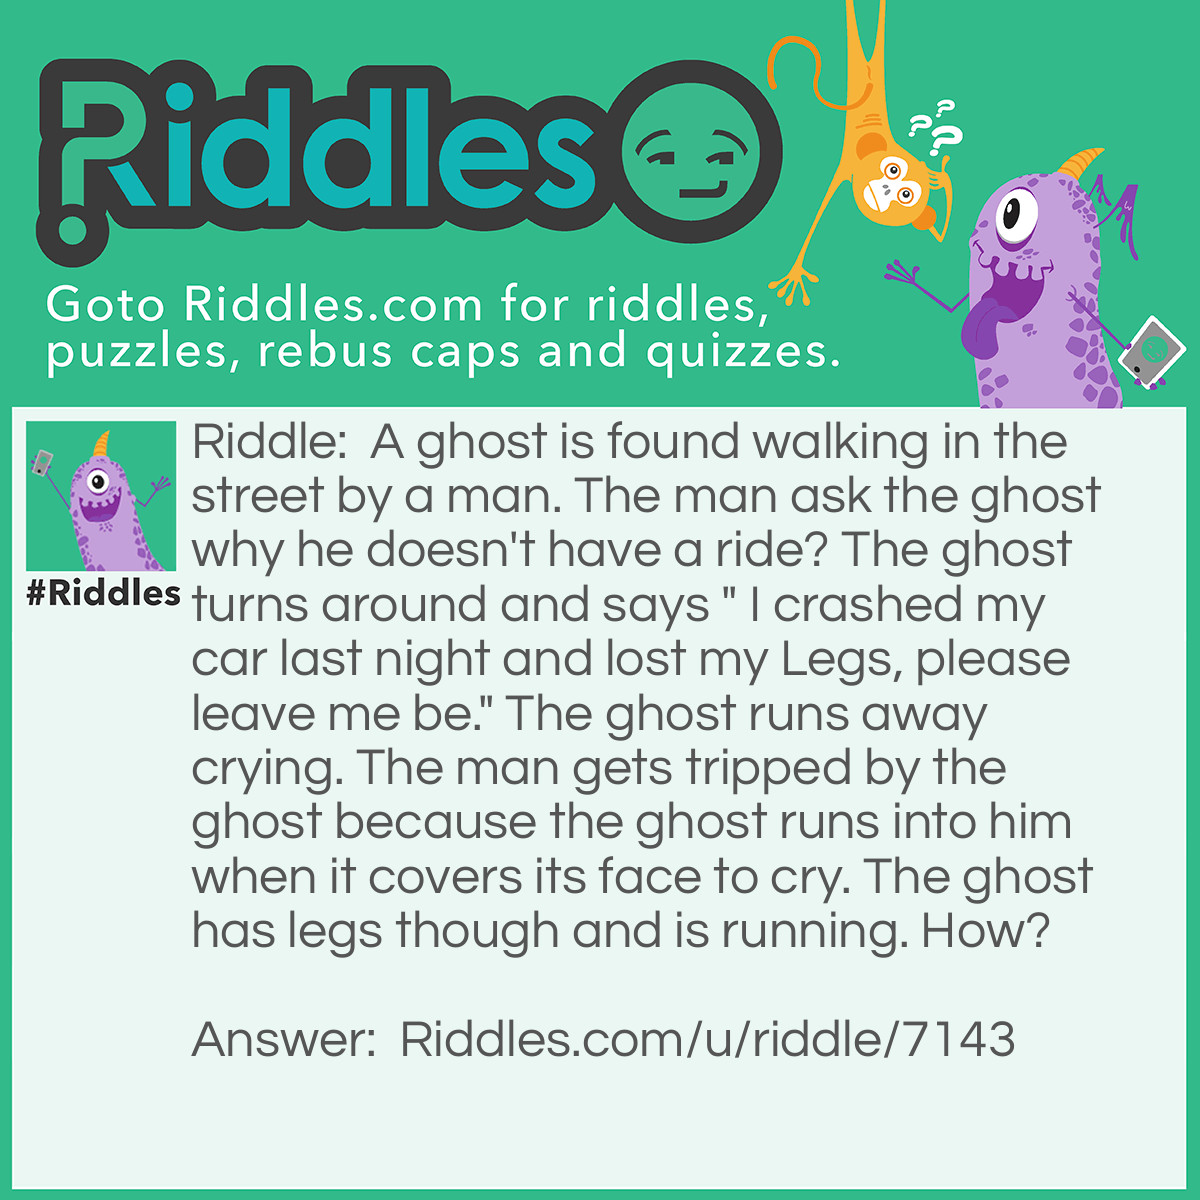 Riddle: A ghost is found walking in the street by a man. The man ask the ghost why he doesn't have a ride? The ghost turns around and says " I crashed my car last night and lost my Legs, please leave me be." The ghost runs away crying. The man gets tripped by the ghost because the ghost runs into him when it covers its face to cry. The ghost has legs though and is running. How? Answer: Because he lost his dog Legs in the car crash, not his own legs.